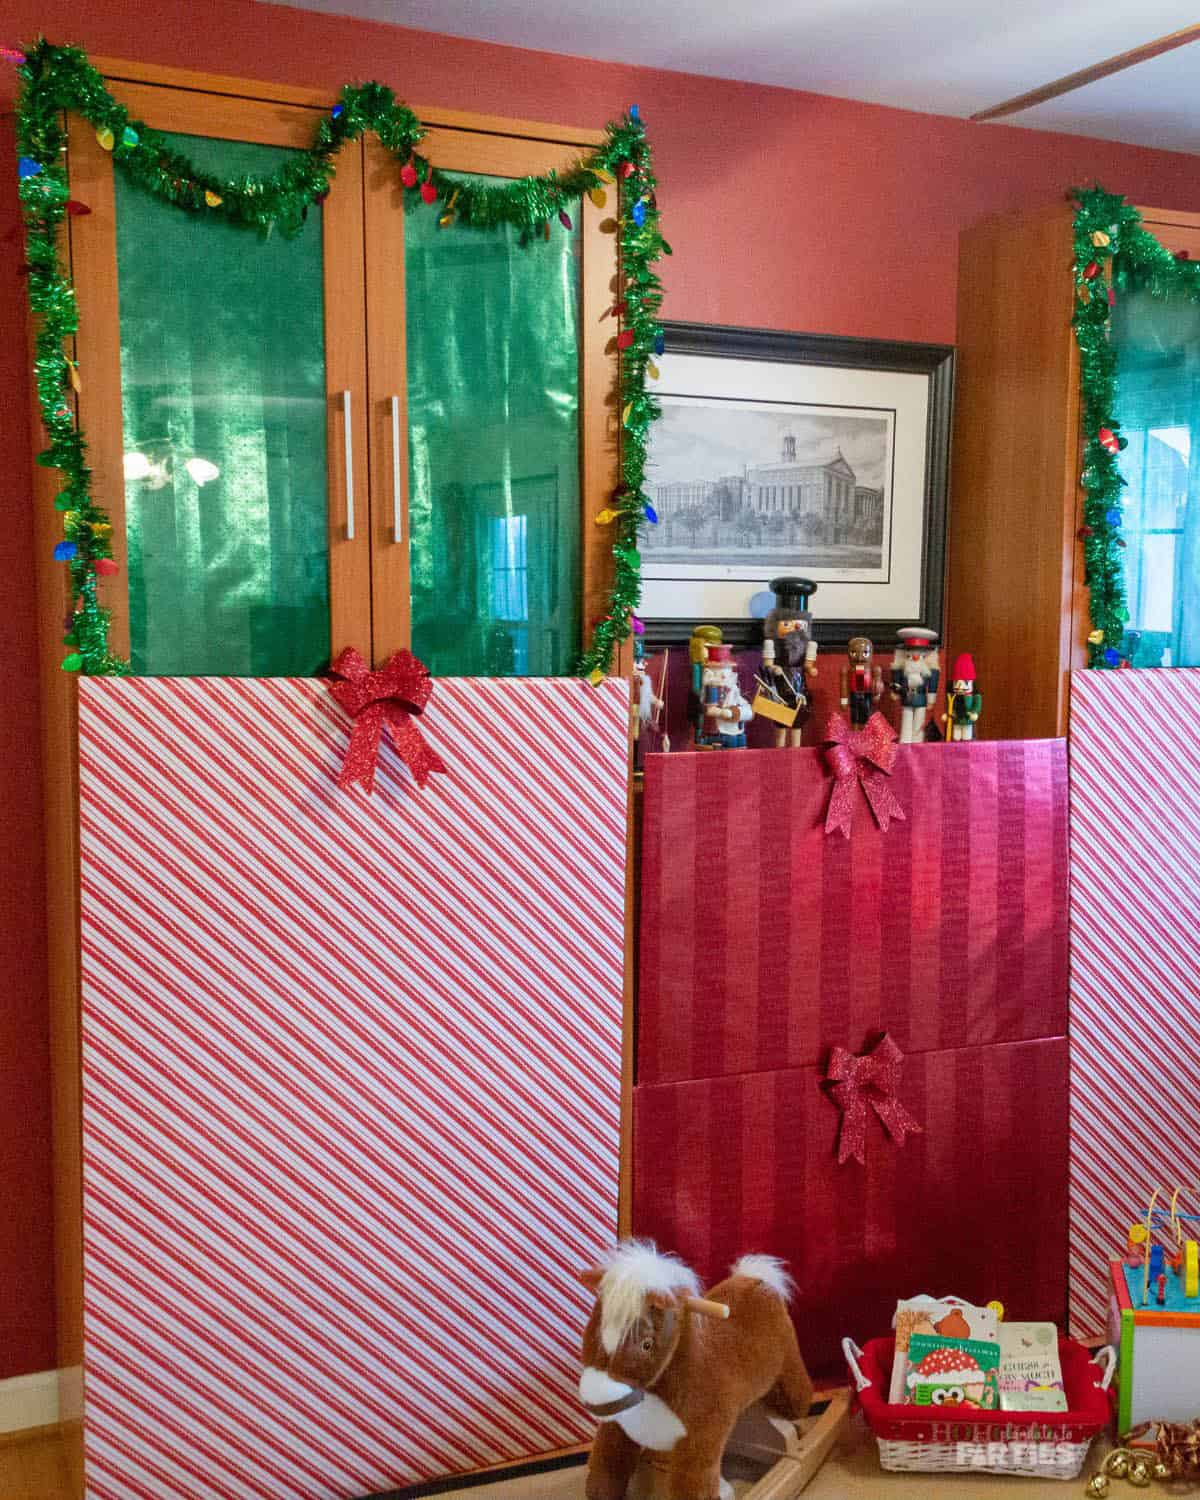 Large cardboard pieces decorated to look like giant Christmas gifts for a party.